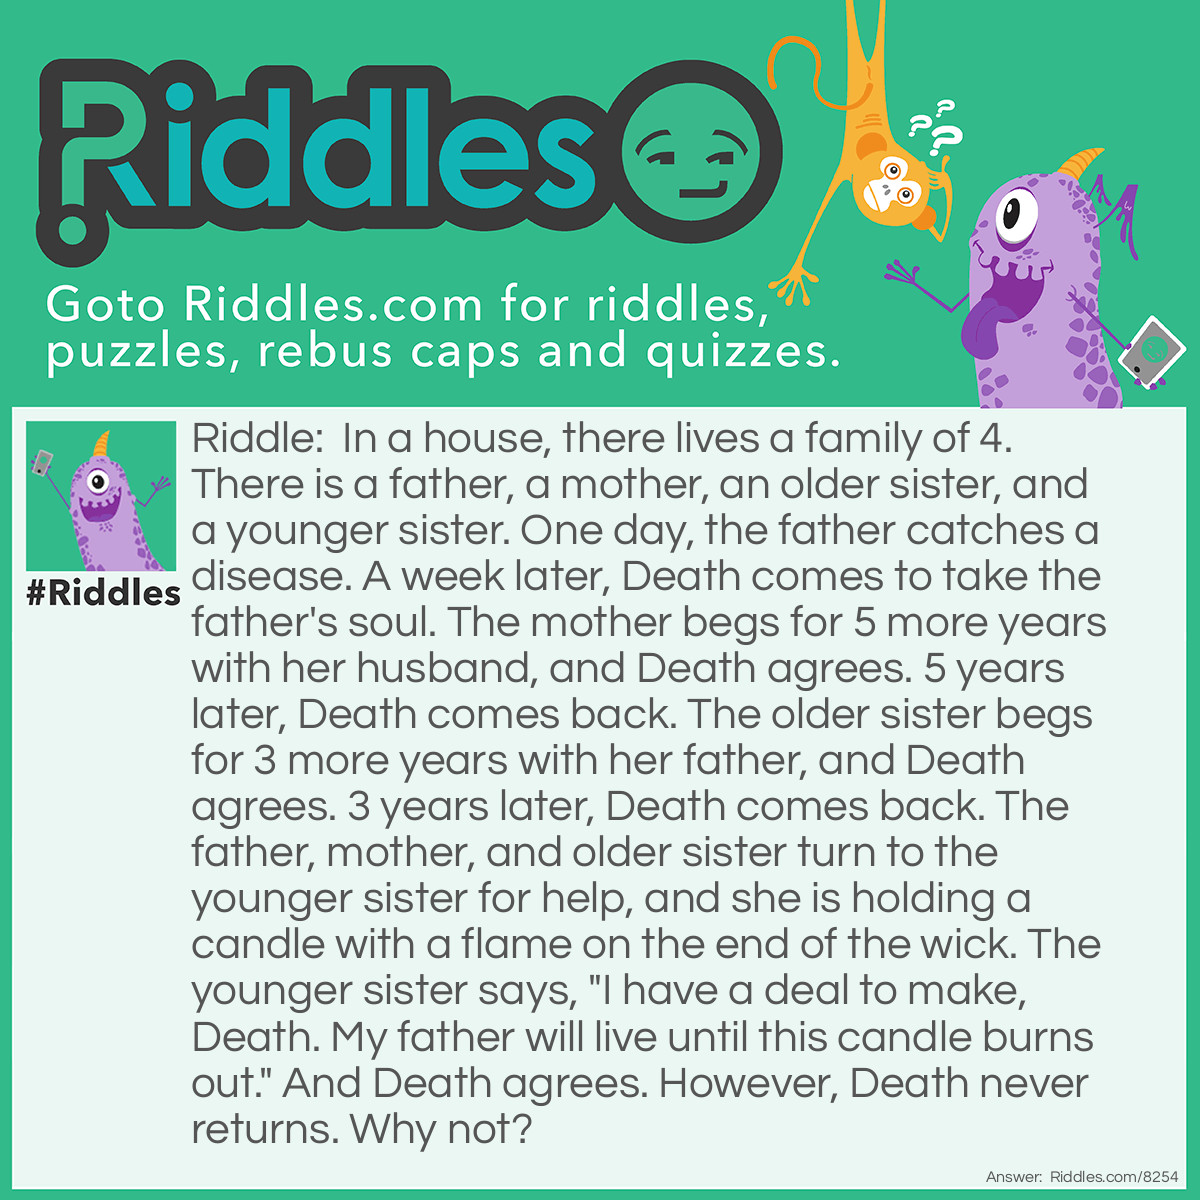 Riddle: In a house, there lives a family of 4. There is a father, a mother, an older sister, and a younger sister. One day, the father catches a disease. A week later, Death comes to take the father's soul. The mother begs for 5 more years with her husband, and Death agrees. 5 years later, Death comes back. The older sister begs for 3 more years with her father, and Death agrees. 3 years later, Death comes back. The father, mother, and older sister turn to the younger sister for help, and she is holding a candle with a flame on the end of the wick. The younger sister says, "I have a deal to make, Death. My father will live until this candle burns out." And Death agrees. However, Death never returns. Why not? Answer: The younger sister blew out the candle, so it didn't technically burn out. Then she threw away the candle so the family wouldn't mistakenly light it.